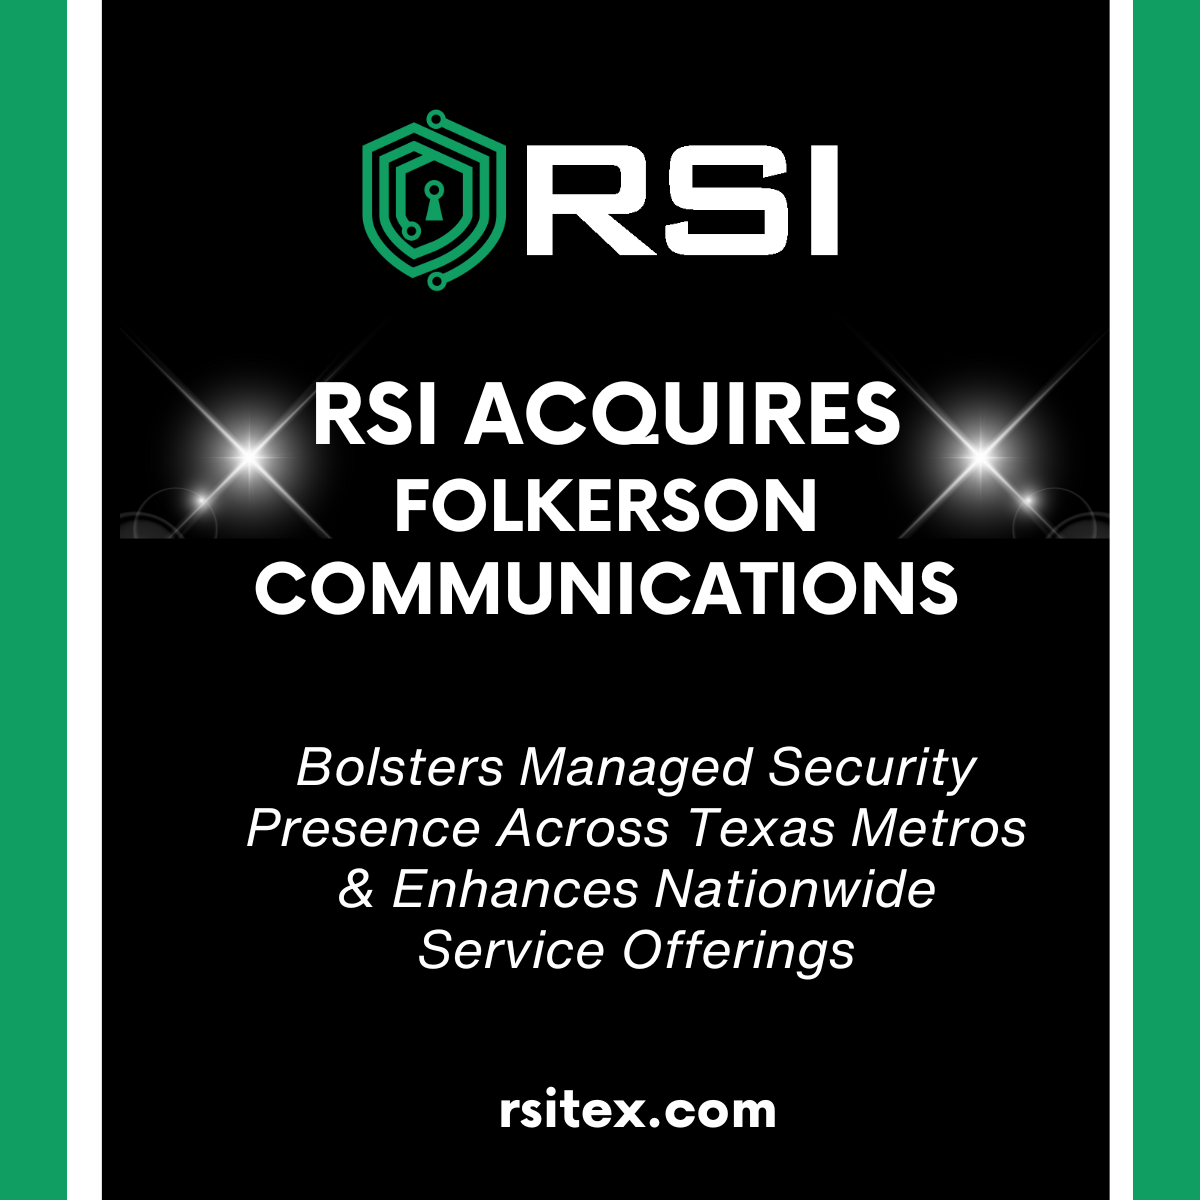 RSI Acquires Folkerson Communications